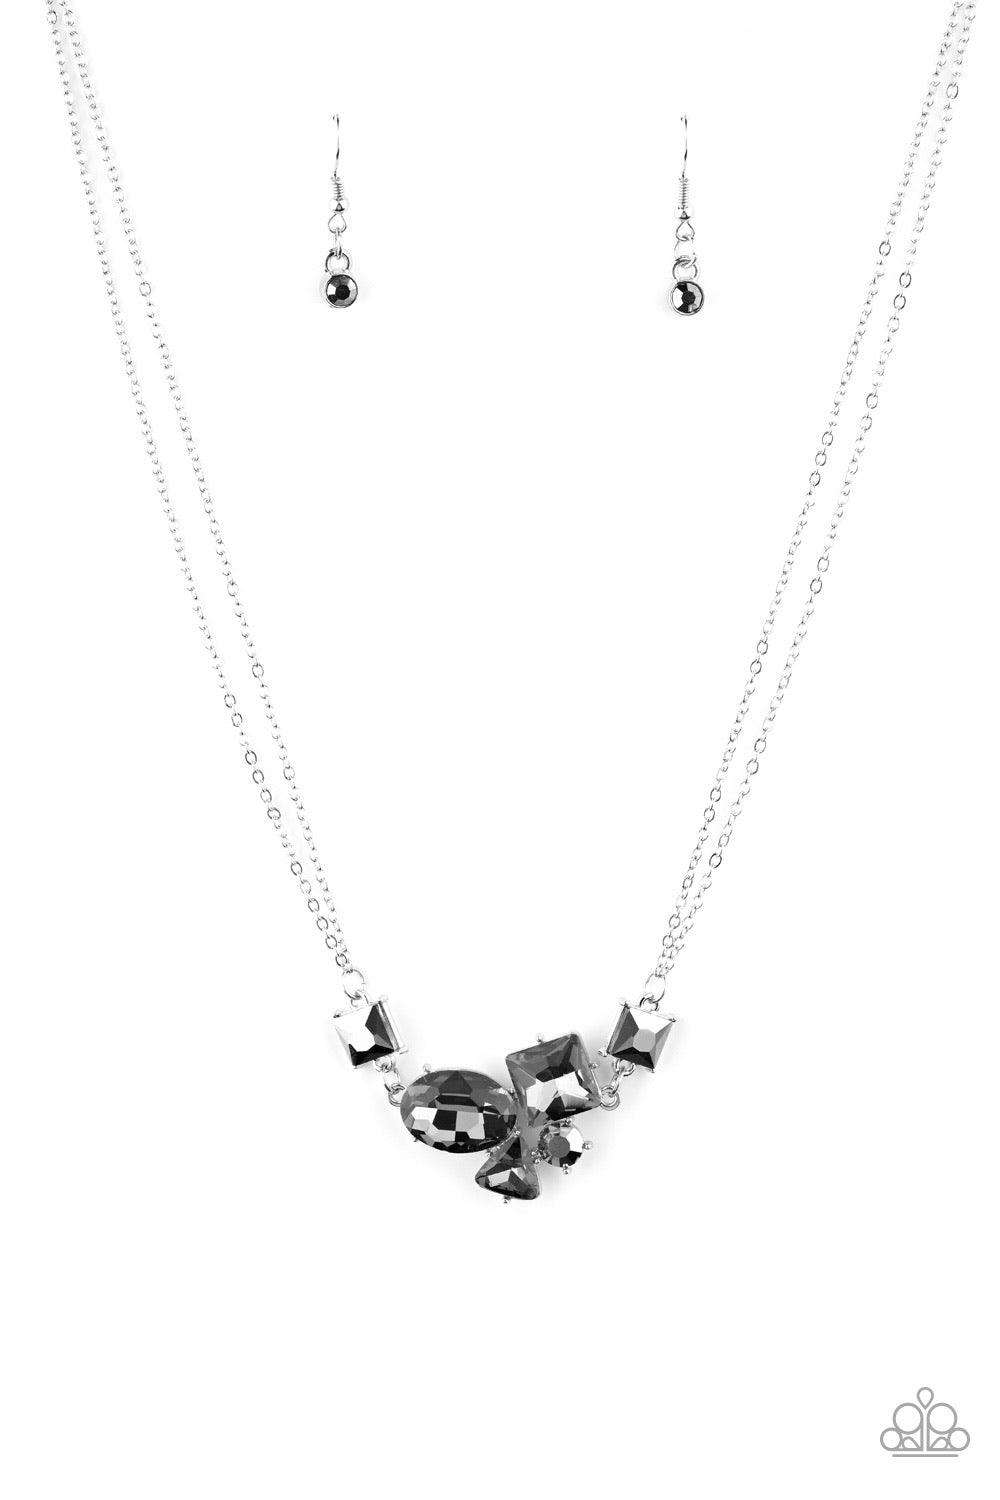 Paparazzi Accessories Constellation Collection - Silver Varying in shape and size, triangular, round, and square cut hematite and smoky rhinestones coalesce into a floating pendant at the bottom of doubled silver chains, creating a stellar shimmer below t